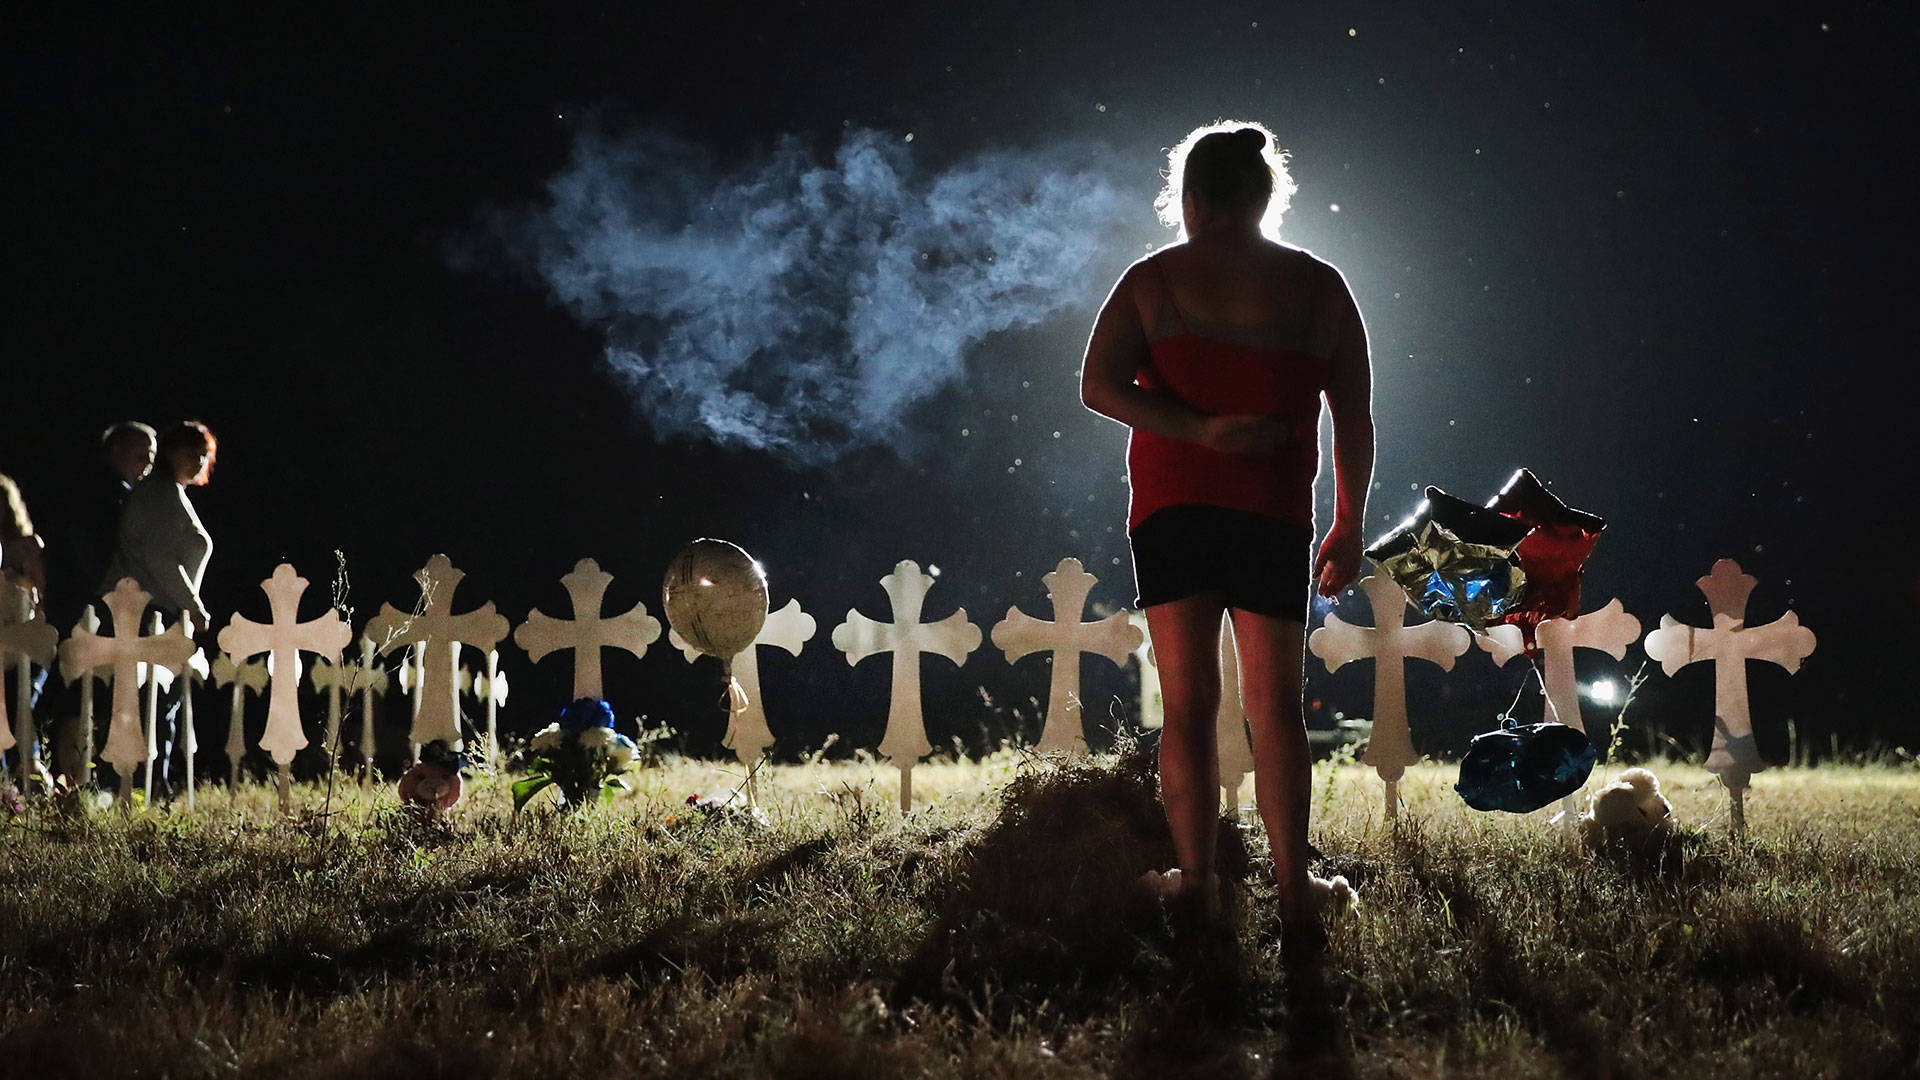 Twenty-six crosses stand in a field on the edge of town to honor the 26 victims killed at the First Baptist Church of Sutherland Springs on Nov. 6, 2017 in Sutherland Springs, Texas.  Scott Olson/Getty Images